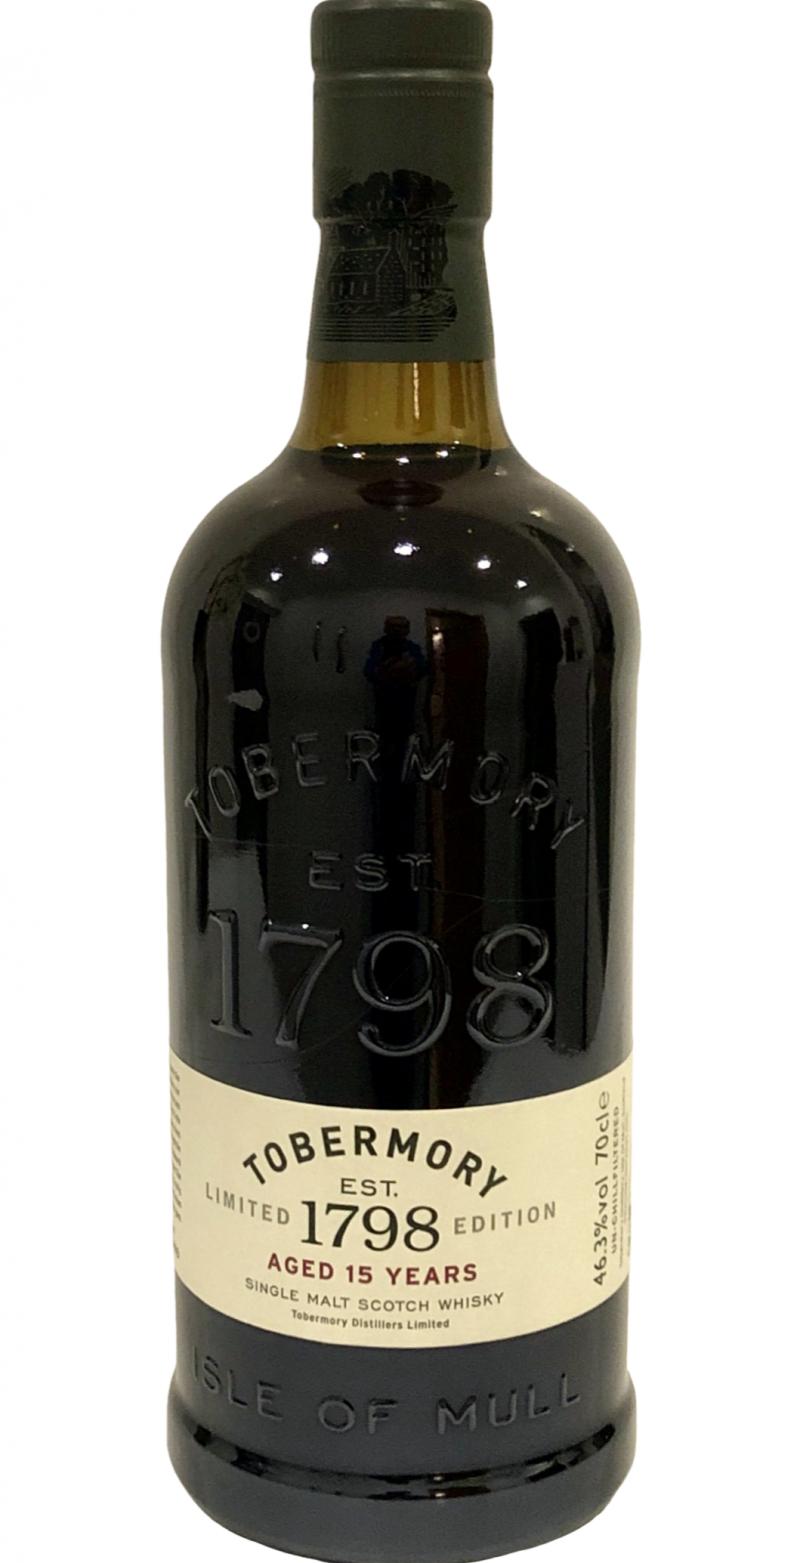 Tobermory 15-year-old